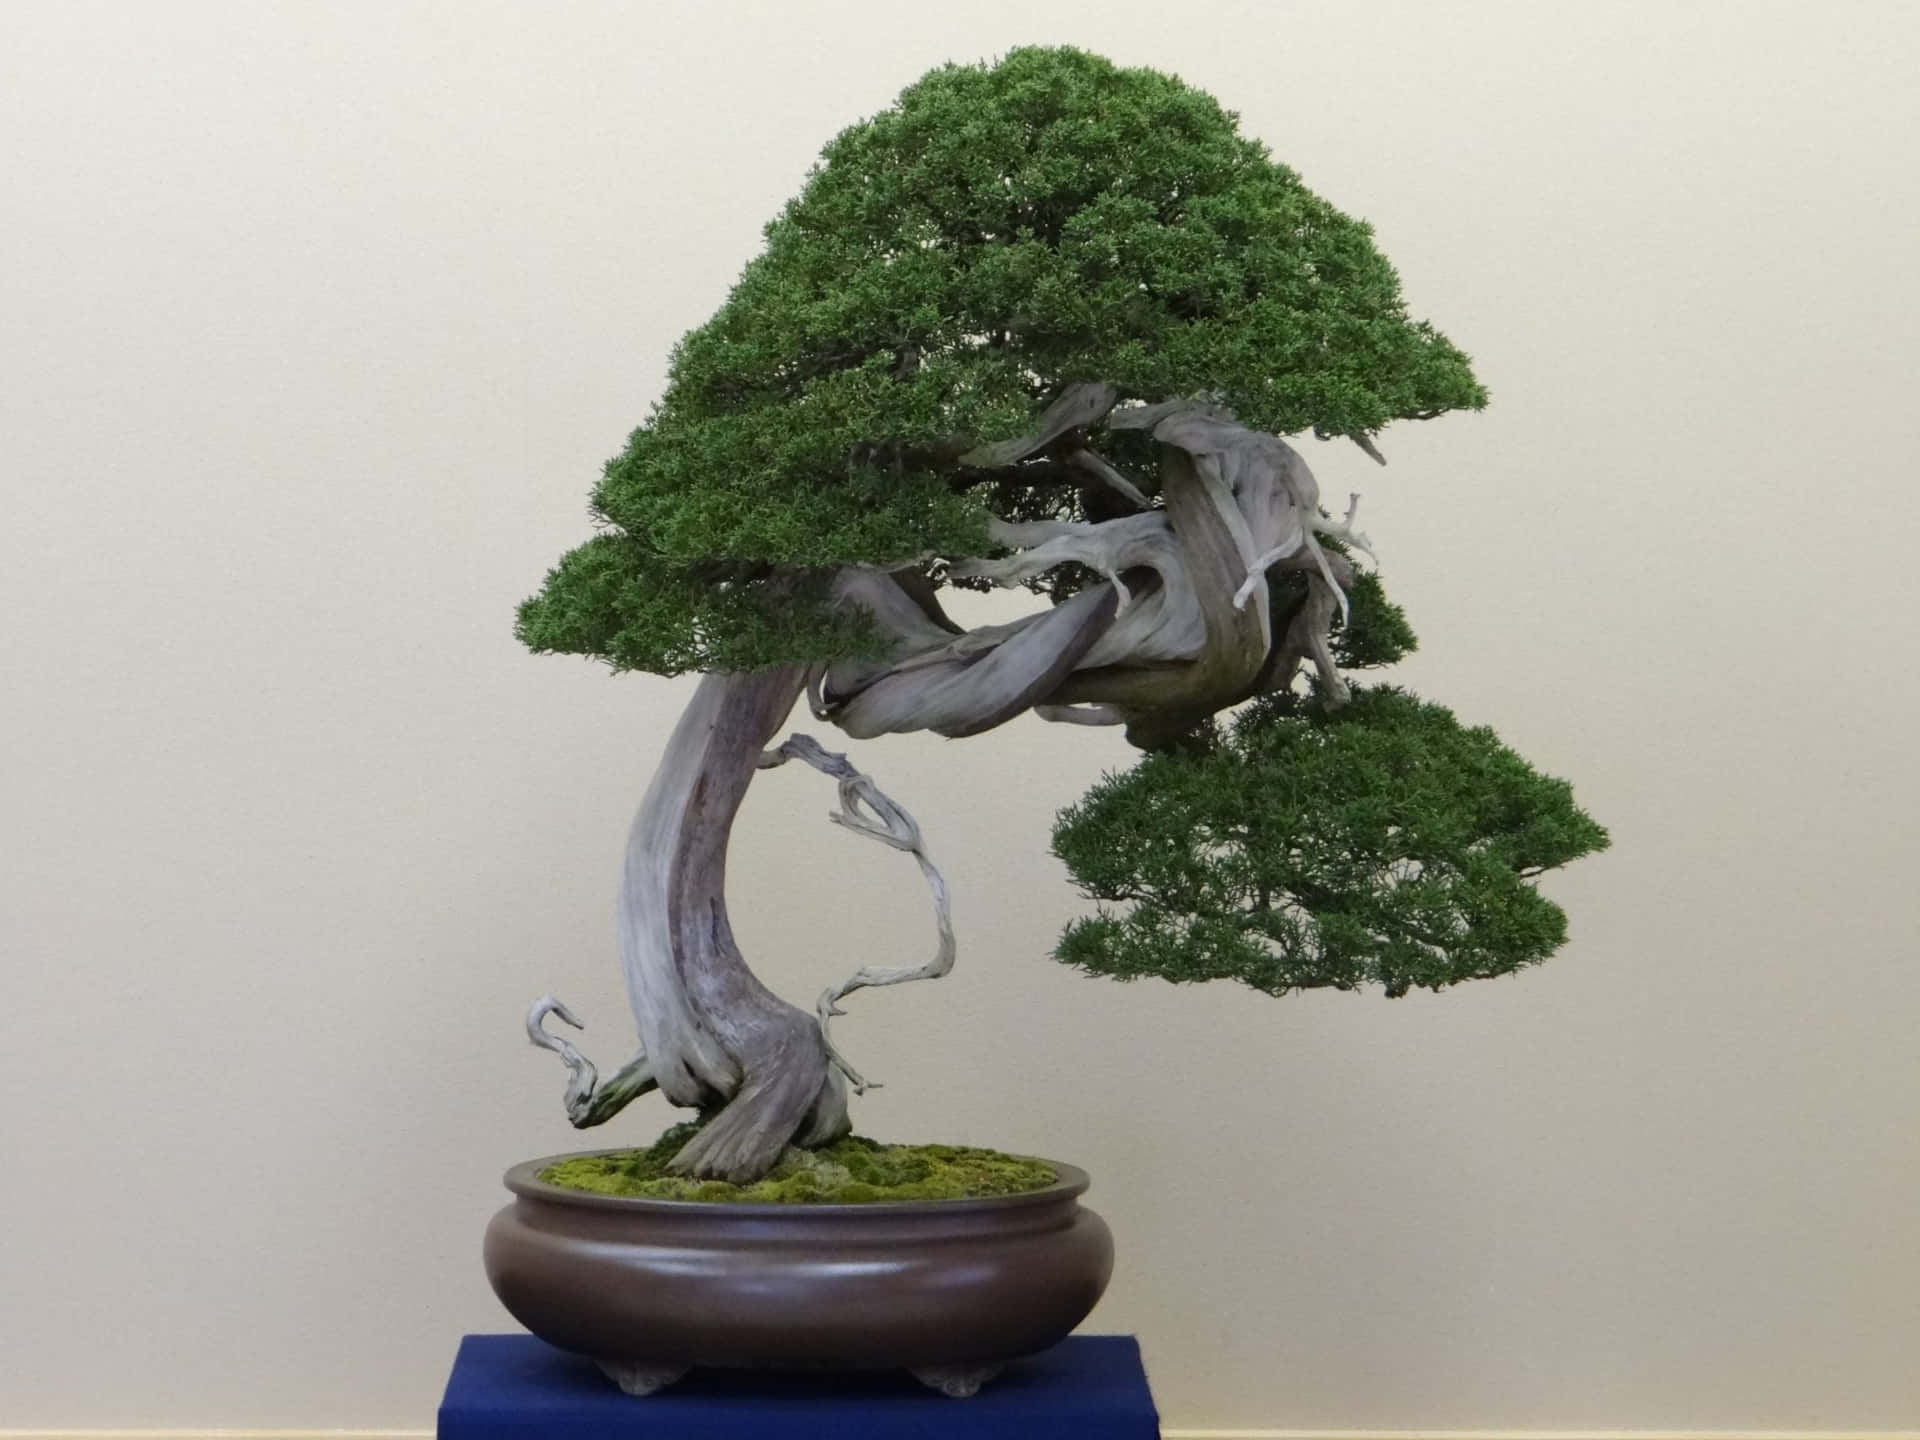 "A Beautiful Bonsai Tree with Uniquely-Trimmed Foliage"